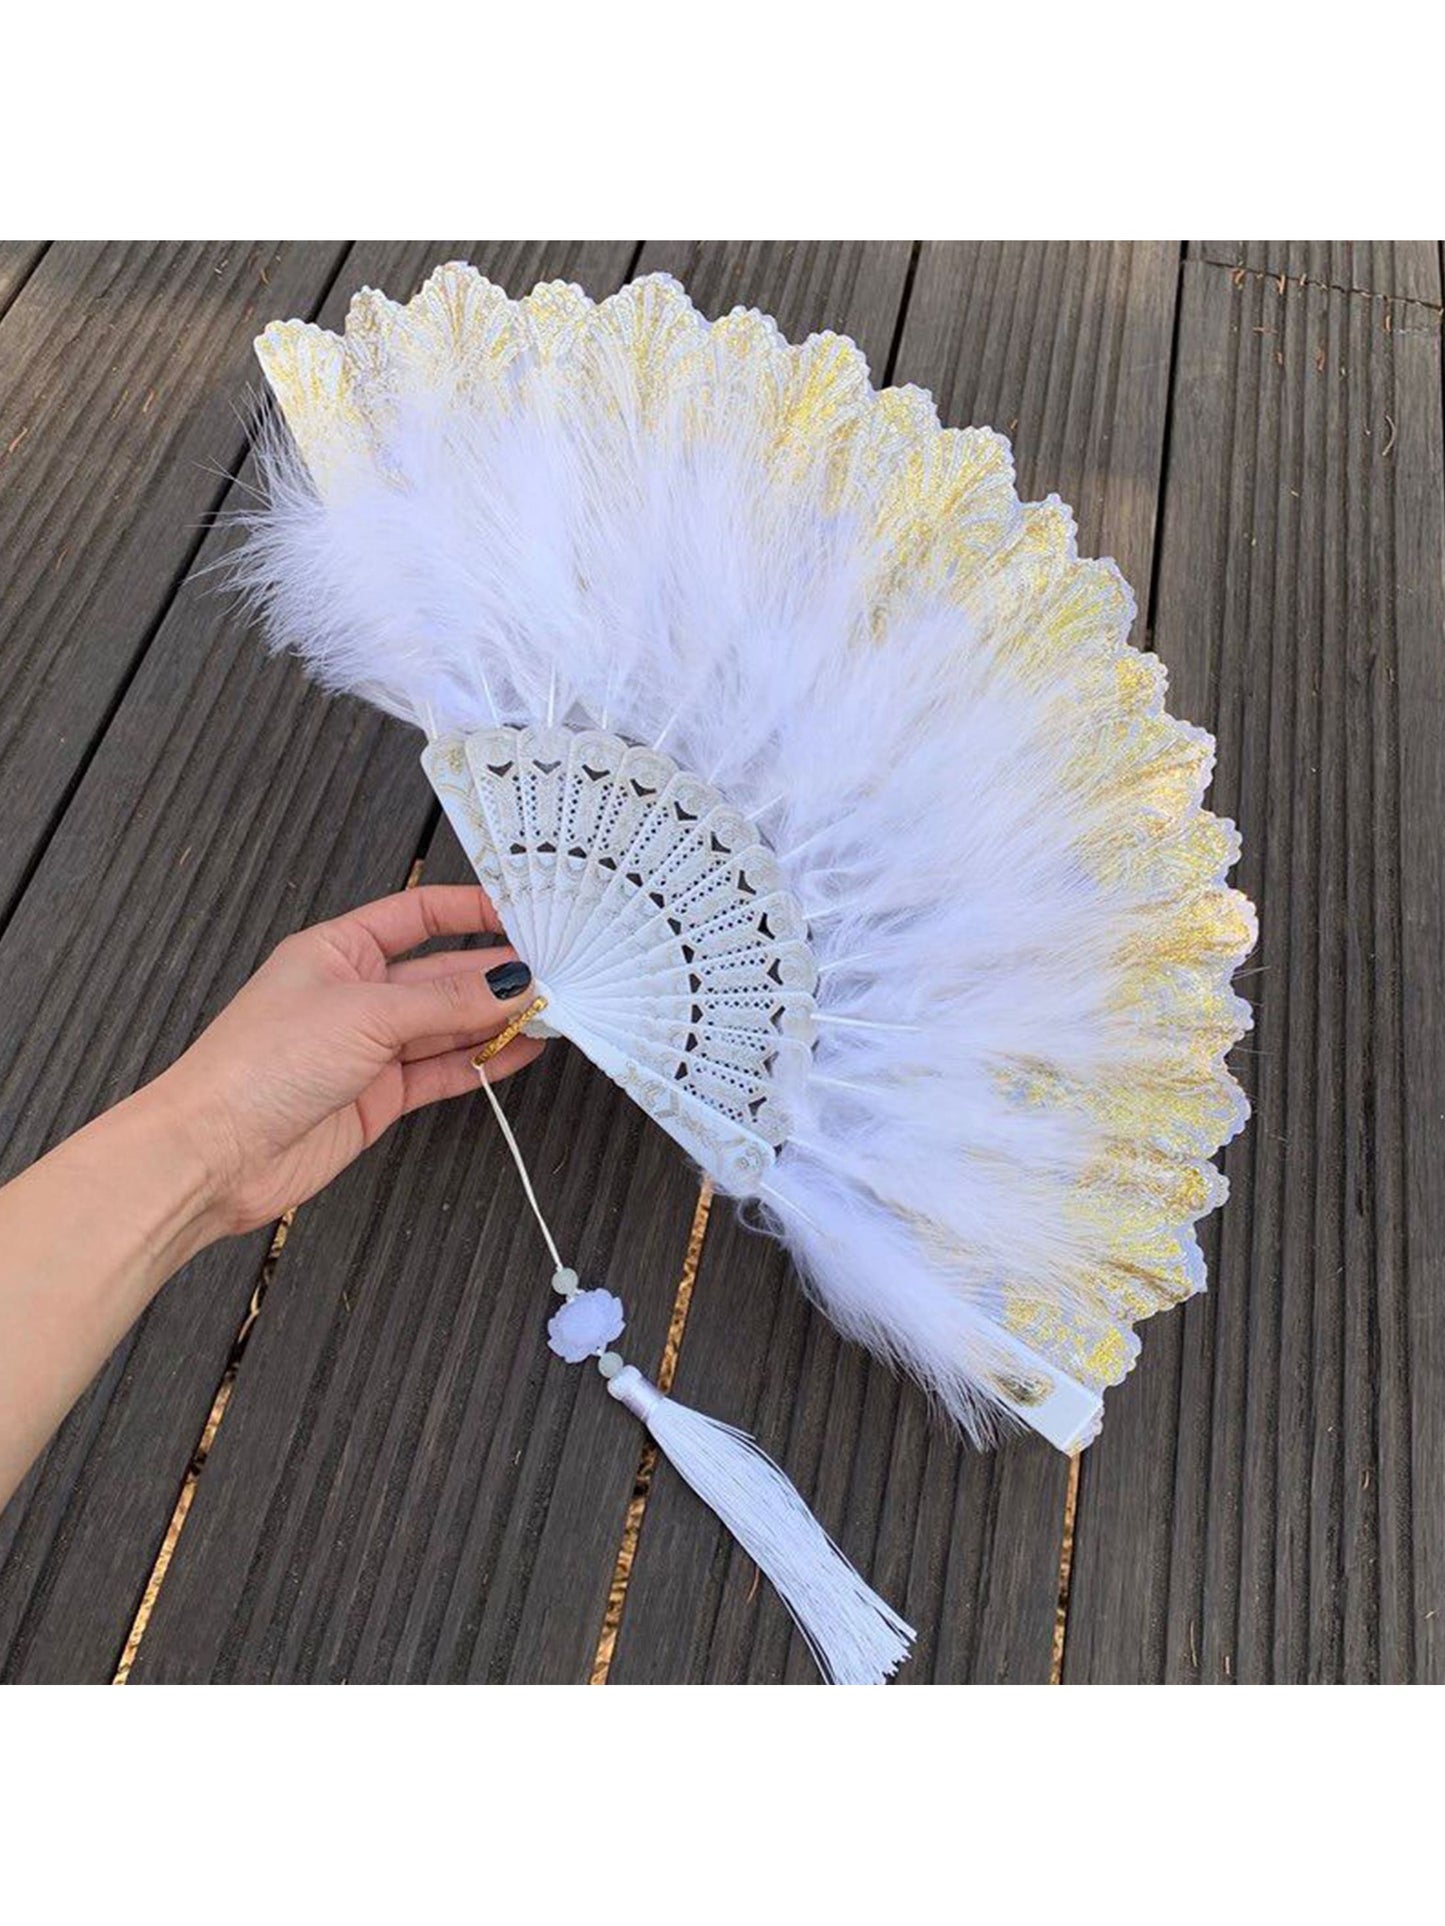 Victorian Style Golden Printing Tassel Lace Feather Decor Folding Handheld Fan